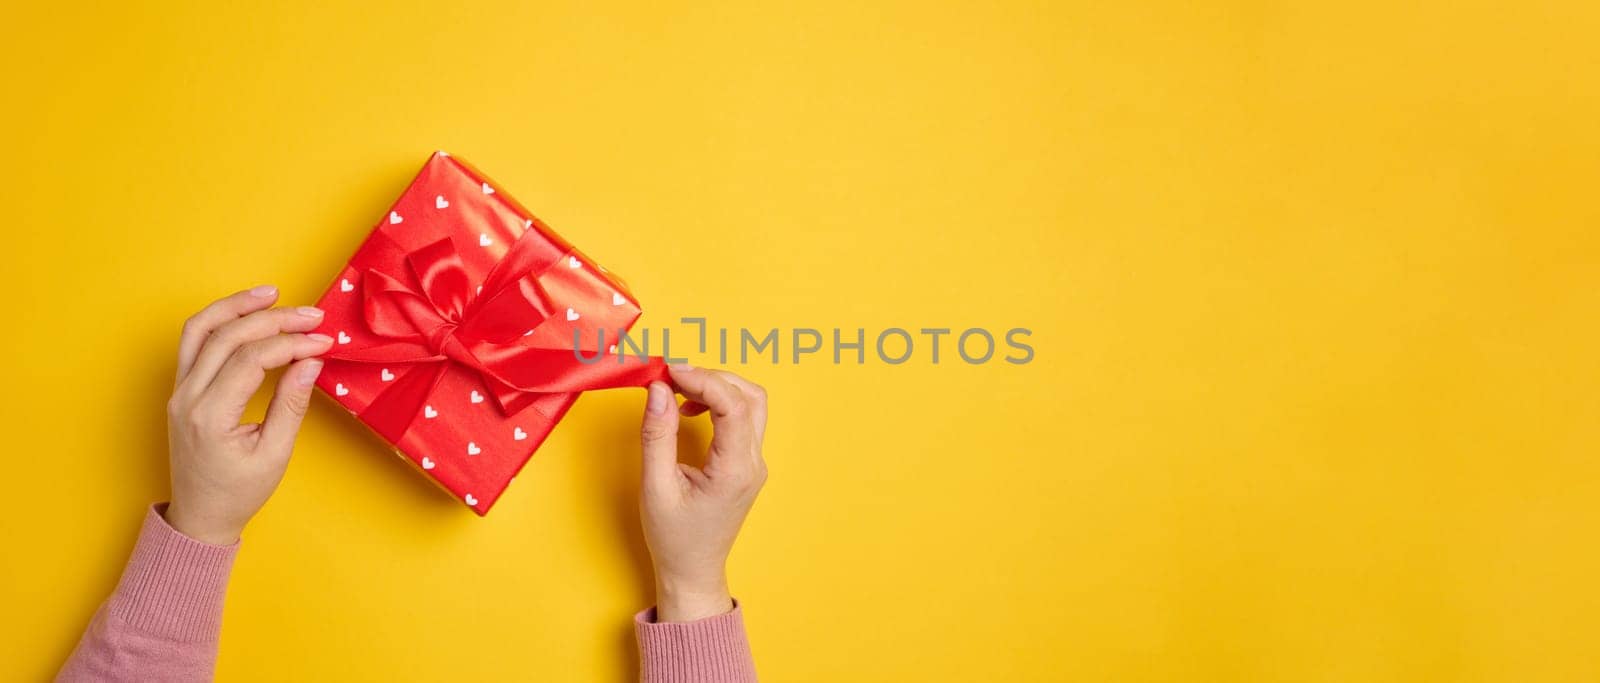 Two female hands hold a red box tied with a ribbon on a yellow background, top view. Copy space